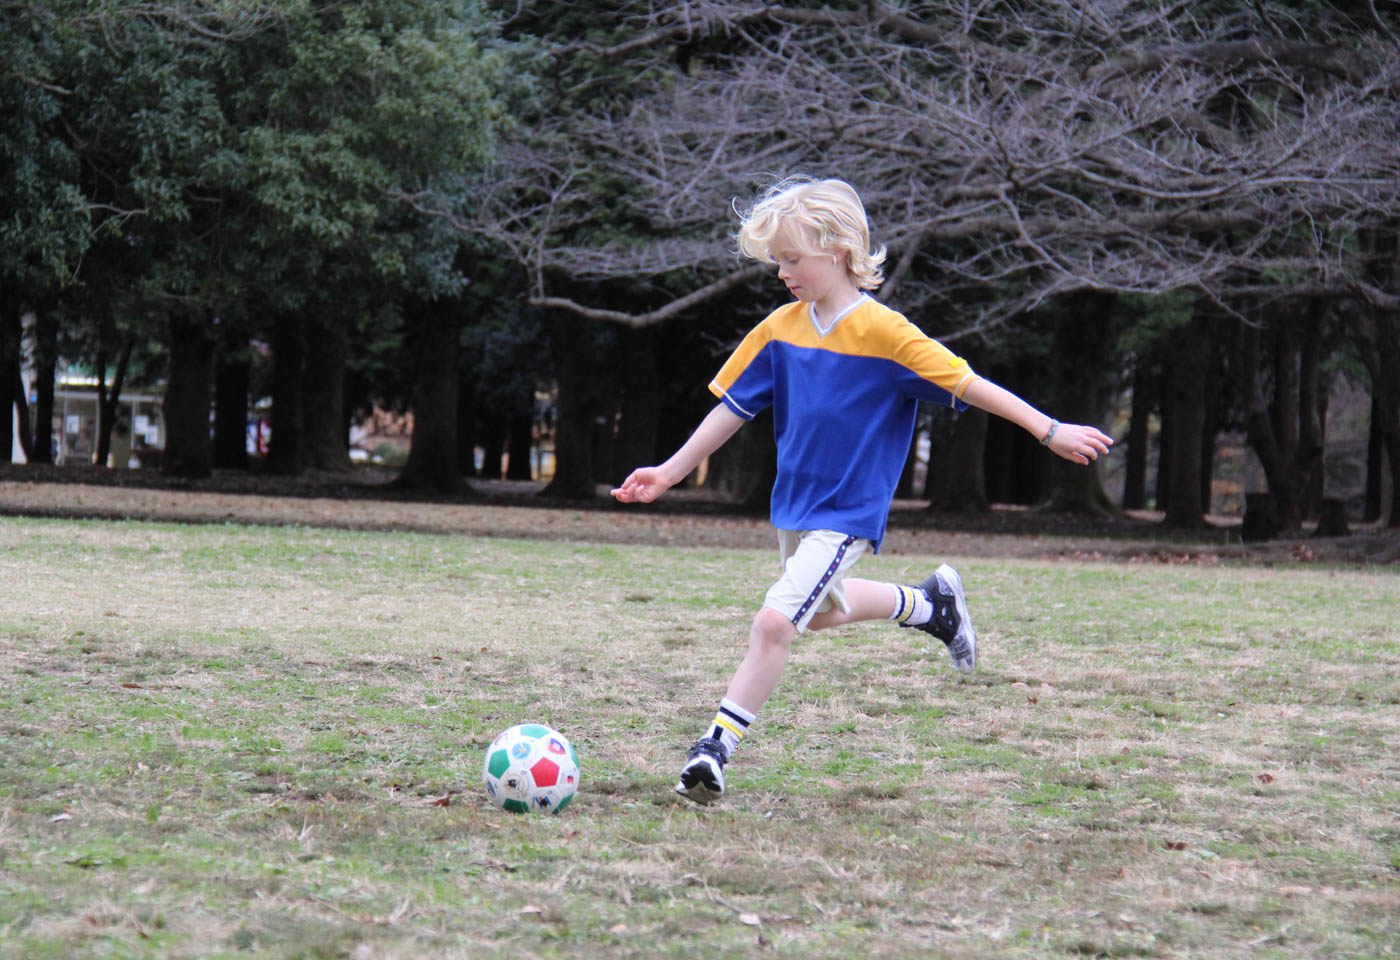 Kid playing soccer taken with Canon EOS 1300D DSLR camera